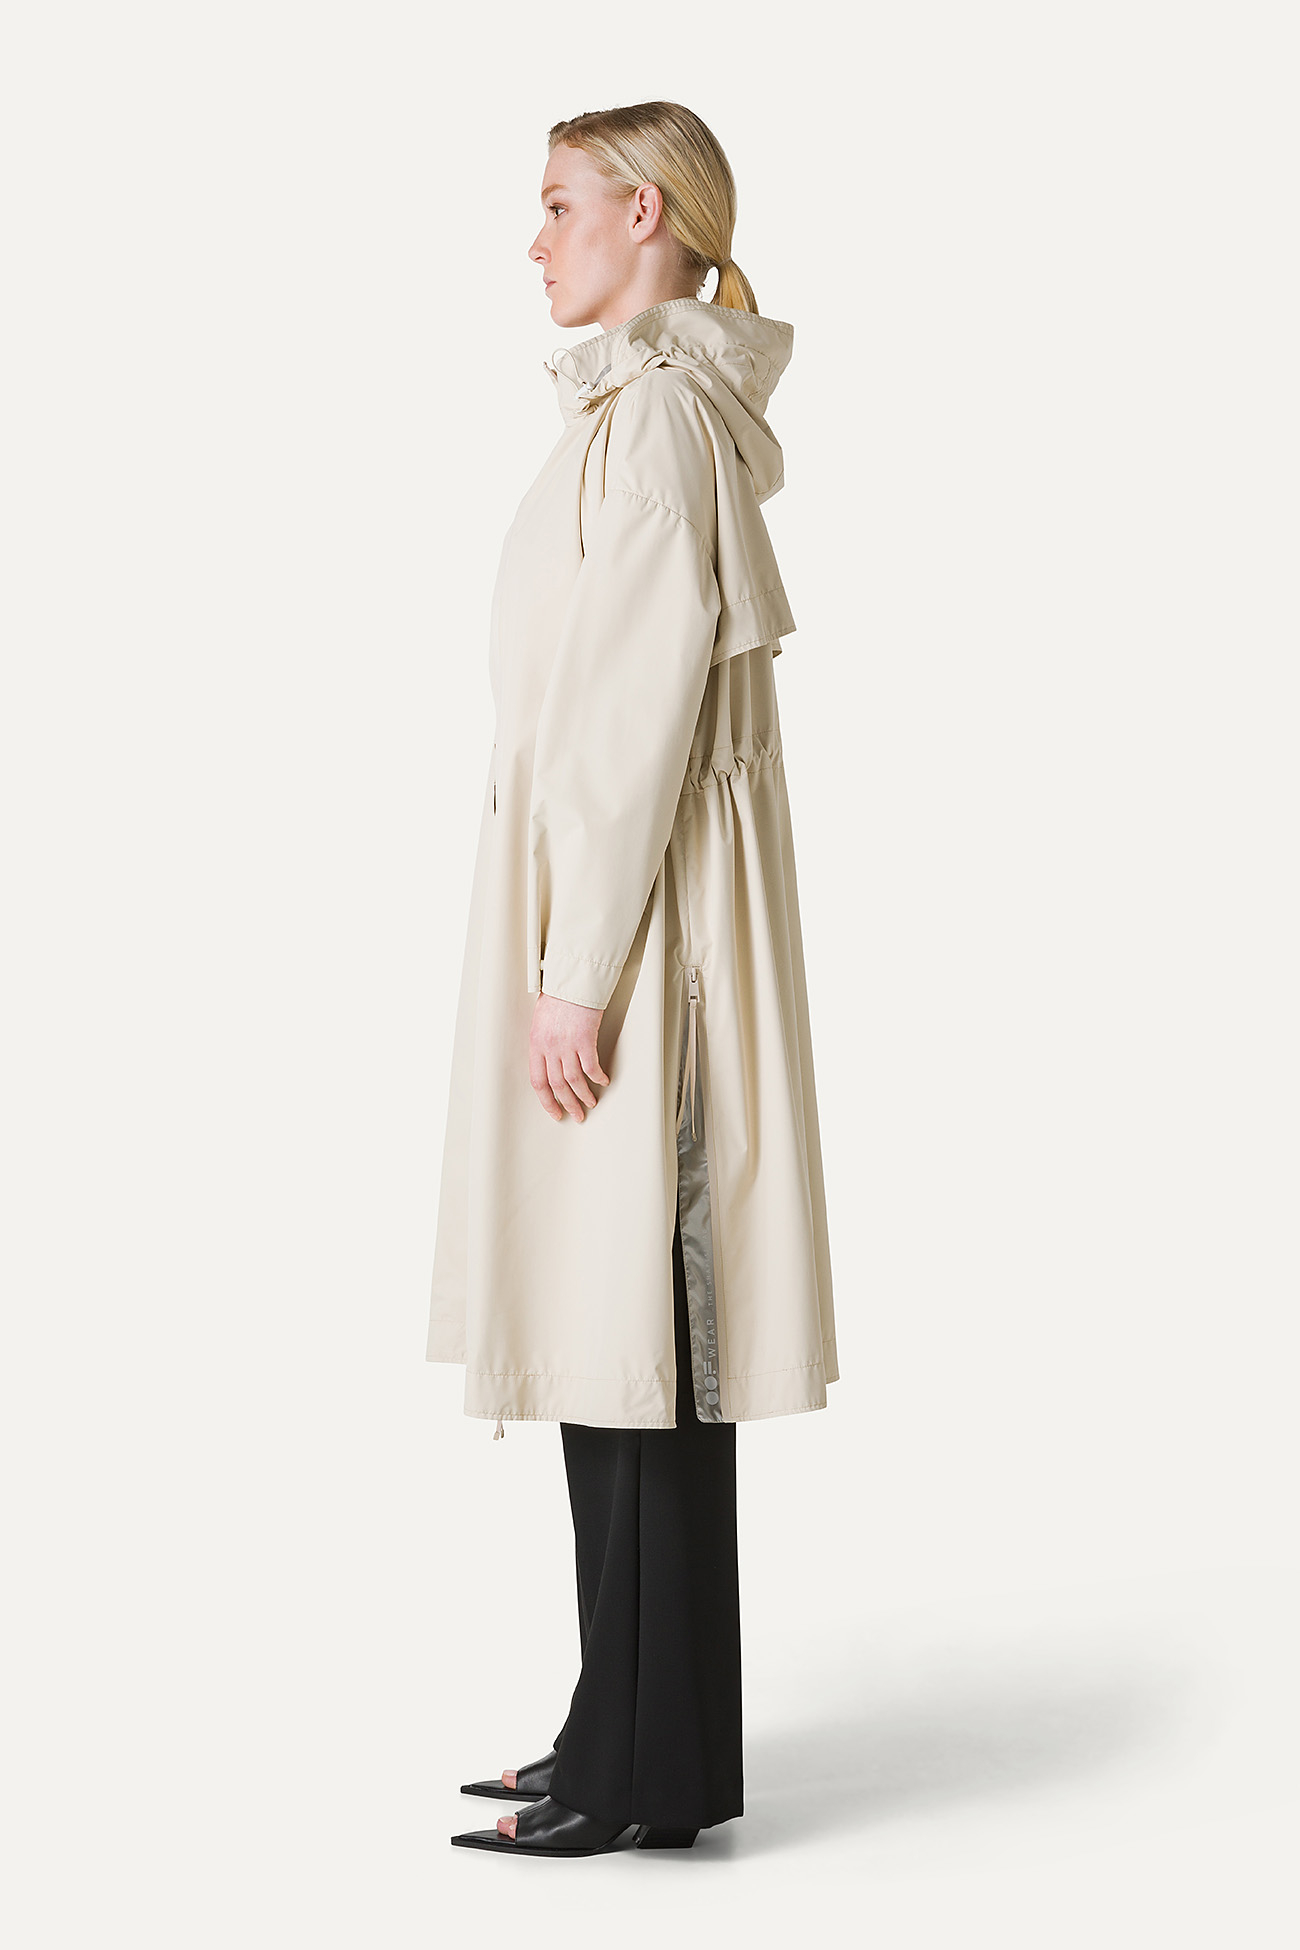 LONG NYLON JACKET WITH SILVER LINING 9216 - CREAM - OOF WEAR